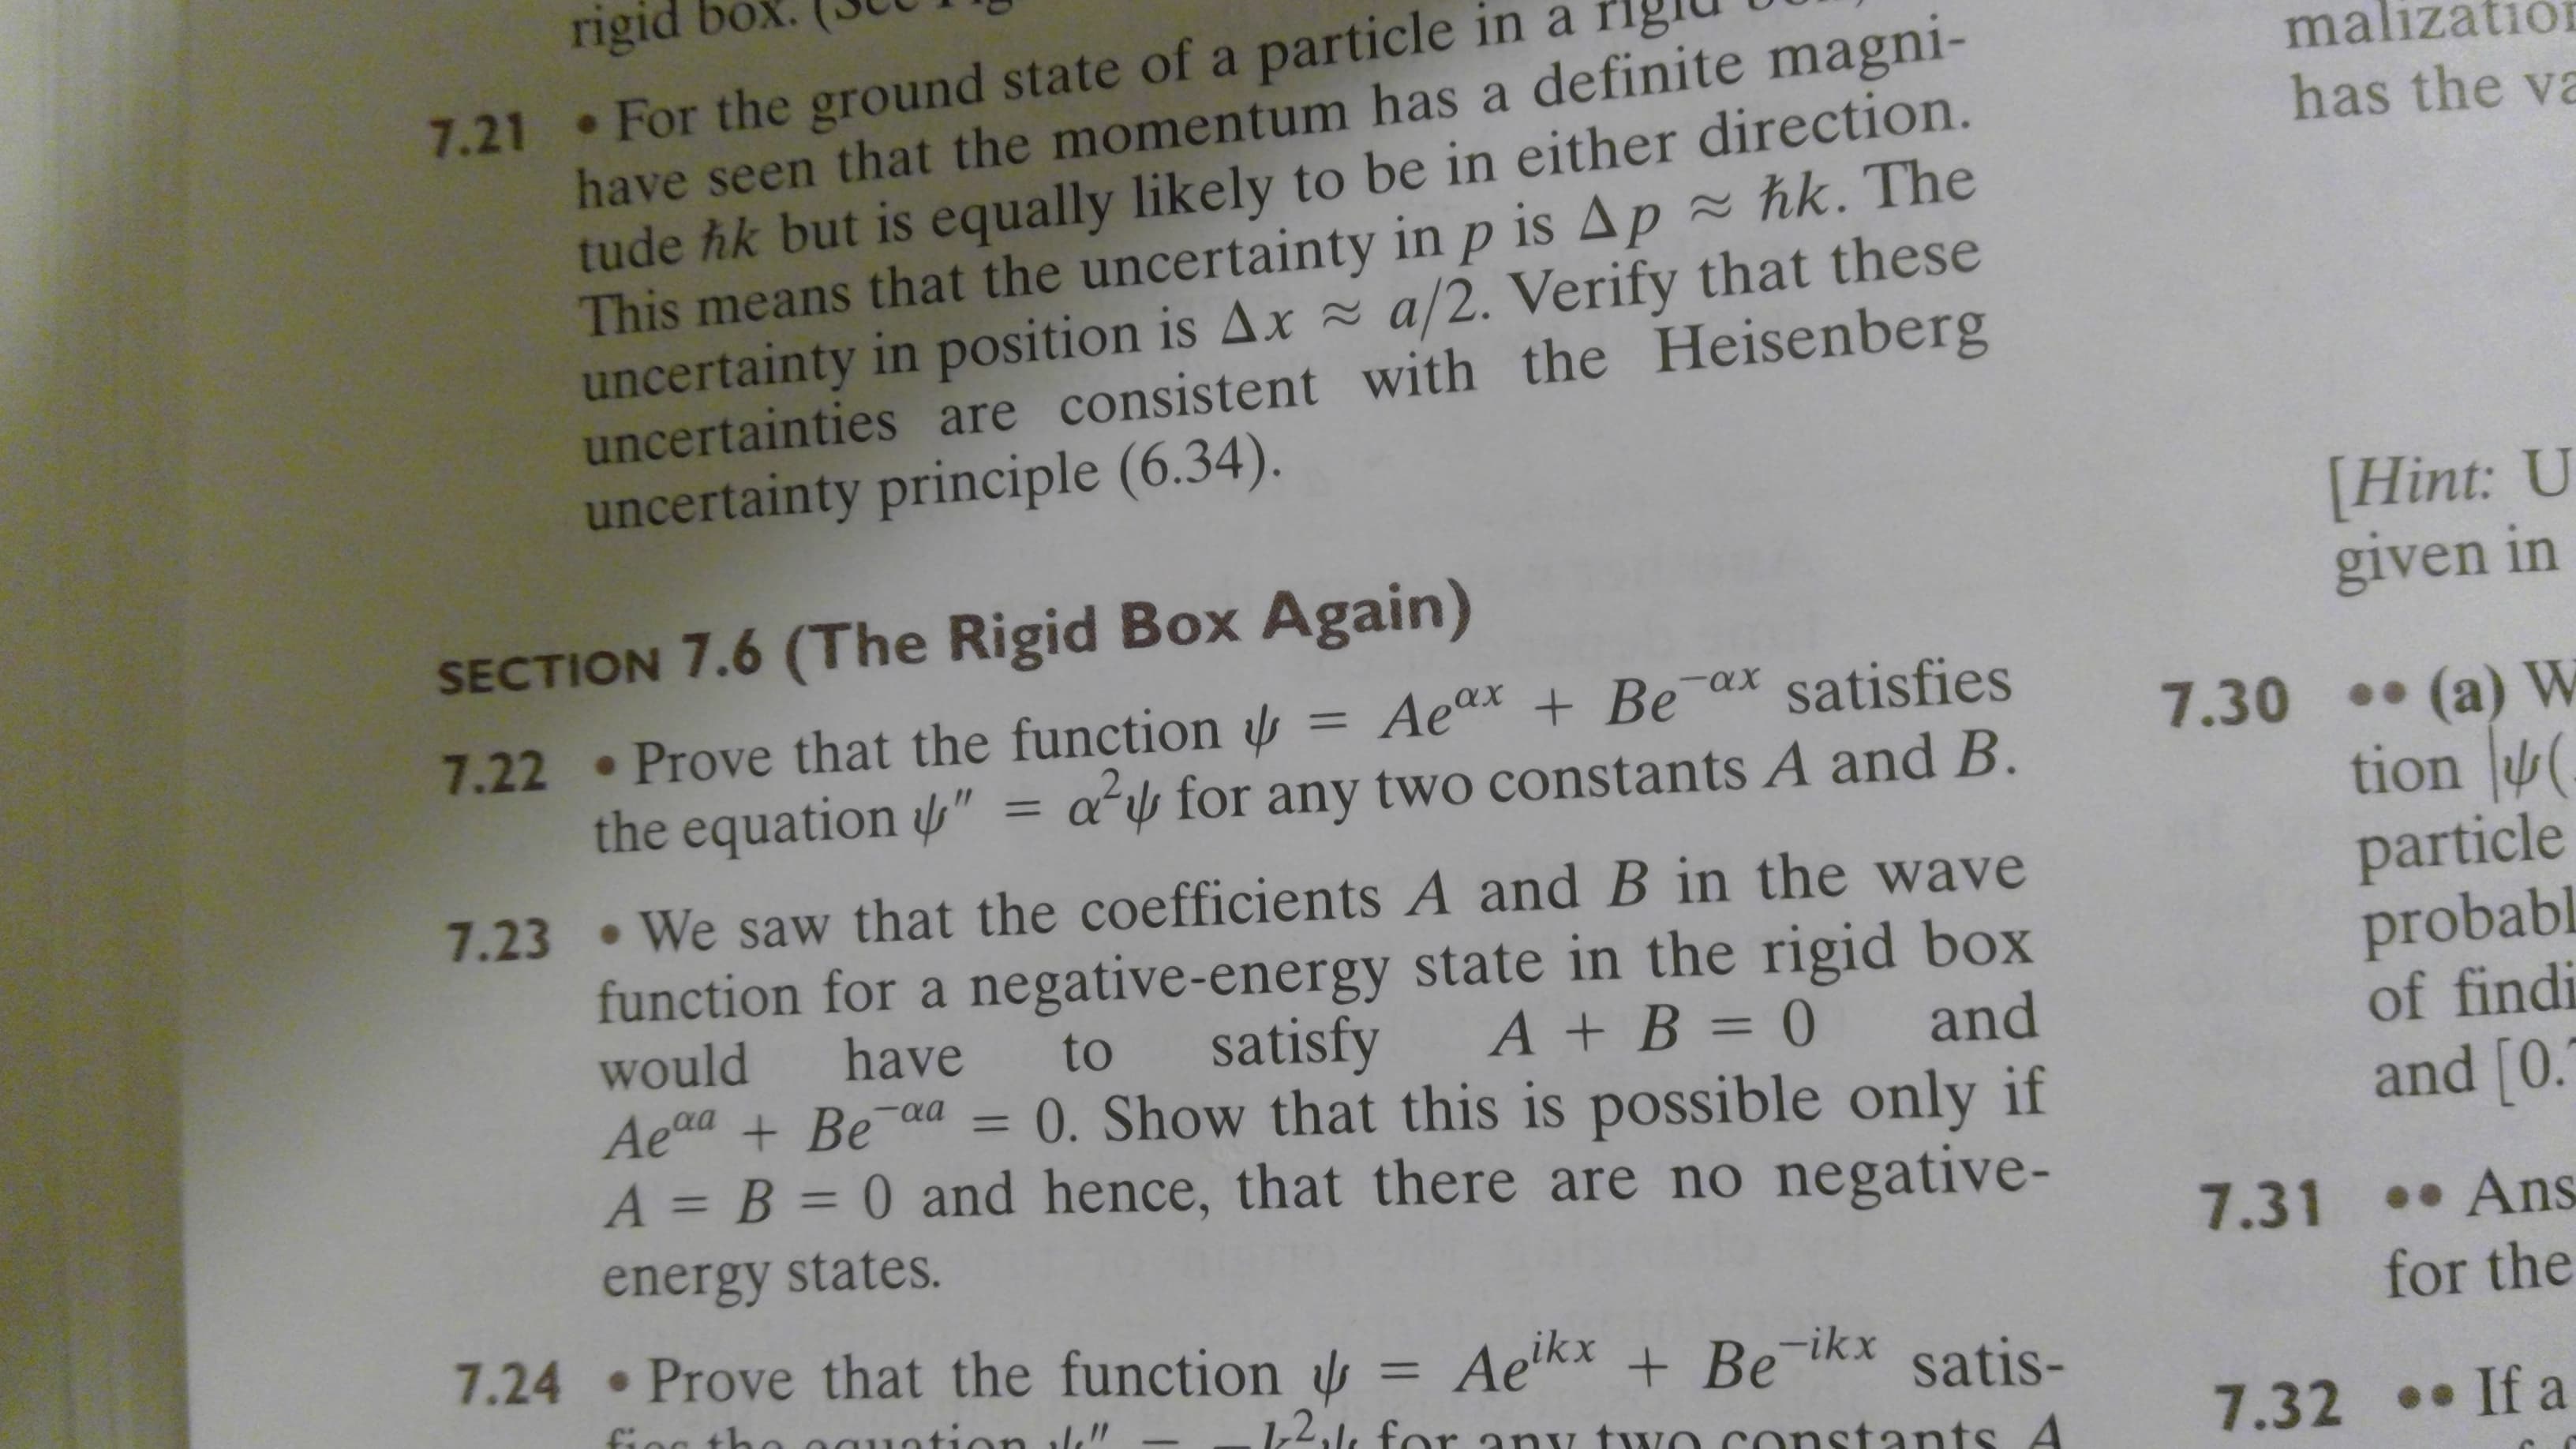 rigid
7.21 For the ground state of a particle in a
have seen that the momentum has a definite magni-
tude hk but is equally likely to be in either direction.
This means that the uncertainty in p is Ap ~ hk. The
uncertainty in position is Ax~ a/2. Verify that these
uncertainties are consistent with the Heisenberg
uncertainty principle (6.34).
malizatio
has the va
[Hint: U
given in
SECTION 7.6 (The Rigid Box Again)
satisfies
7.22 Prove that the function
the equation " = a for any two constants A and B.
= Aeax + Be ax
(a) W
tion
7.30
7.23 We saw that the coefficients A and B in the wave
particle
probabl
of findi
and [0.
function for a negative-energy state in the rigid box
would
satisfy
have
A+B = 0
to
and
0. Show that this is possible only if
A = B = 0 and hence, that there are no negative-
Aead Be aa
11
energy states.
7.31 Ans
for the
7.24 Prove that the function
=Aelkx + Be ikx
satis-
72,1 for any tuIO COnstants A
fioc tho aguntion le"
7.32 If a
